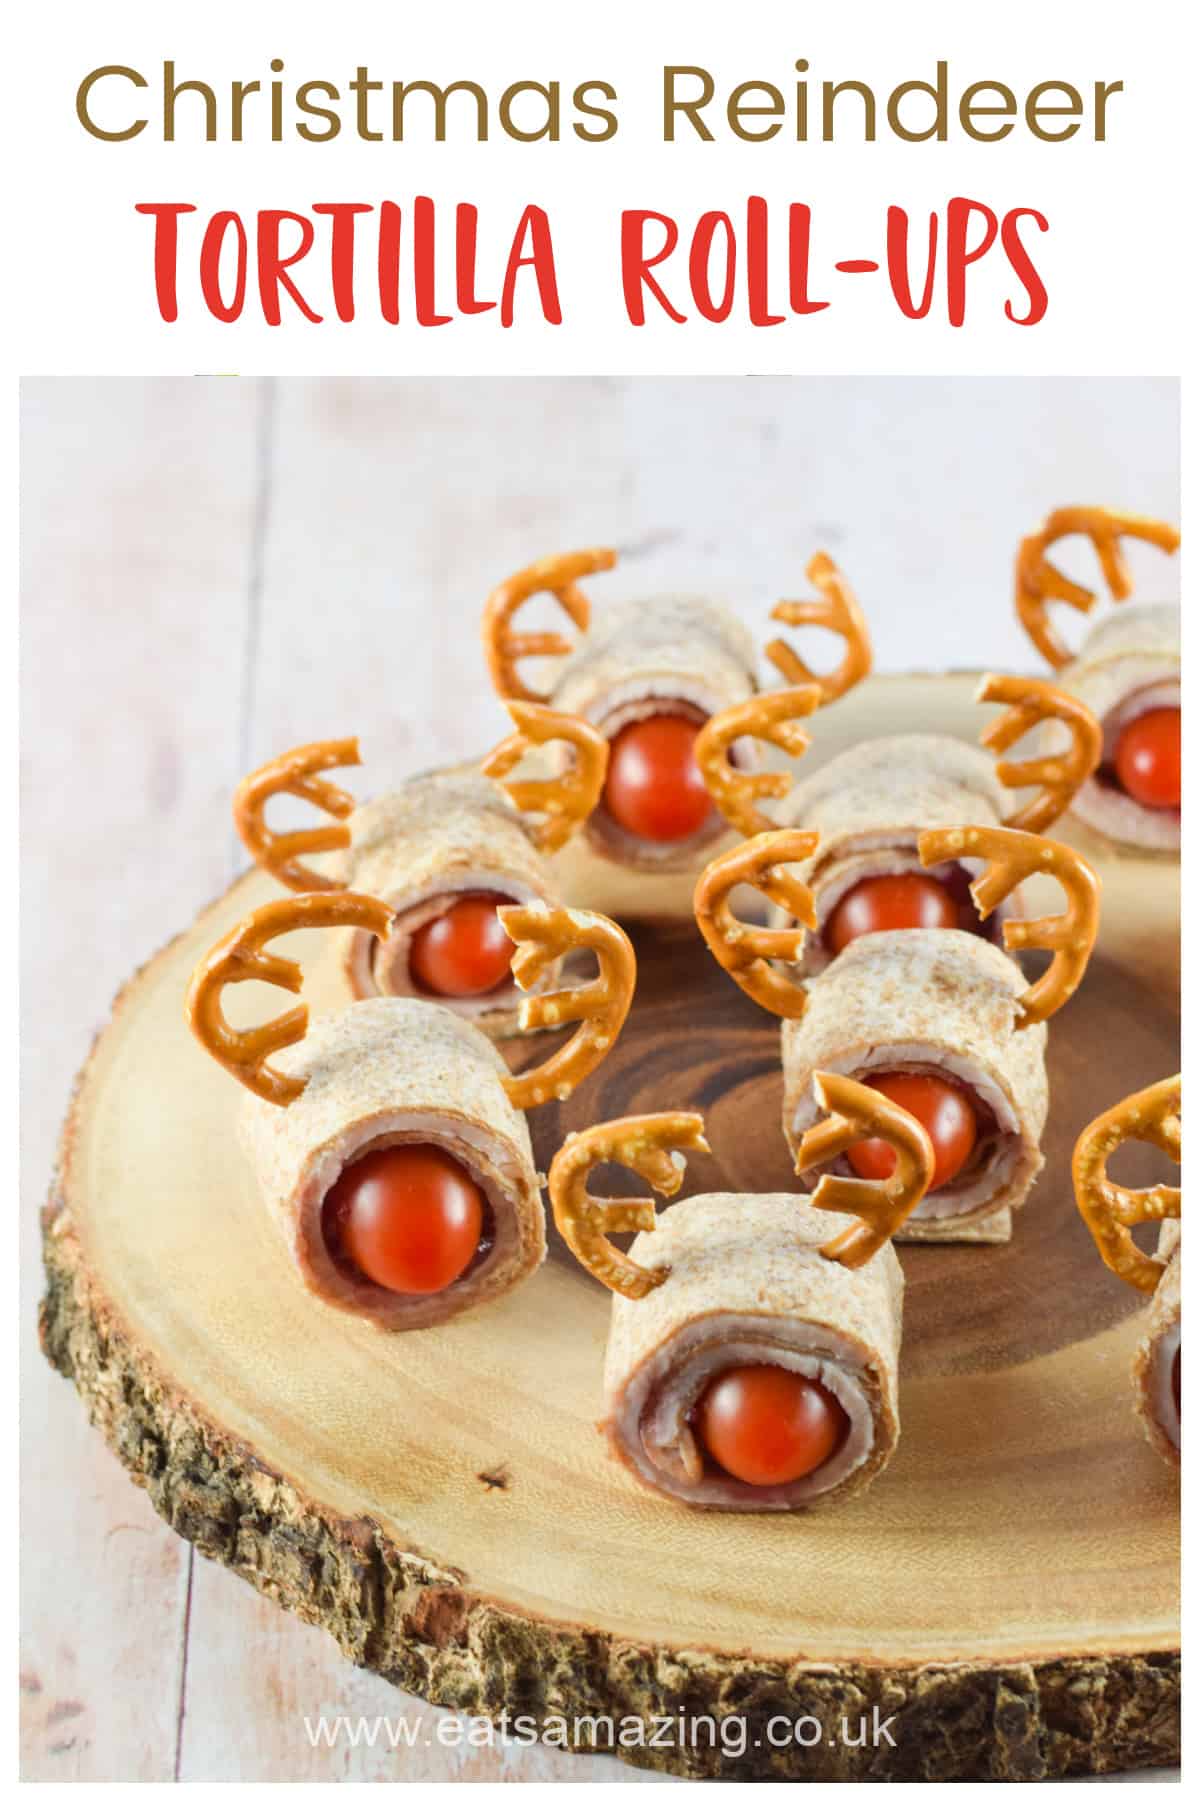 Fun and easy reindeer roll-ups recipe for healthy Christmas party food for kids - with video tutorial